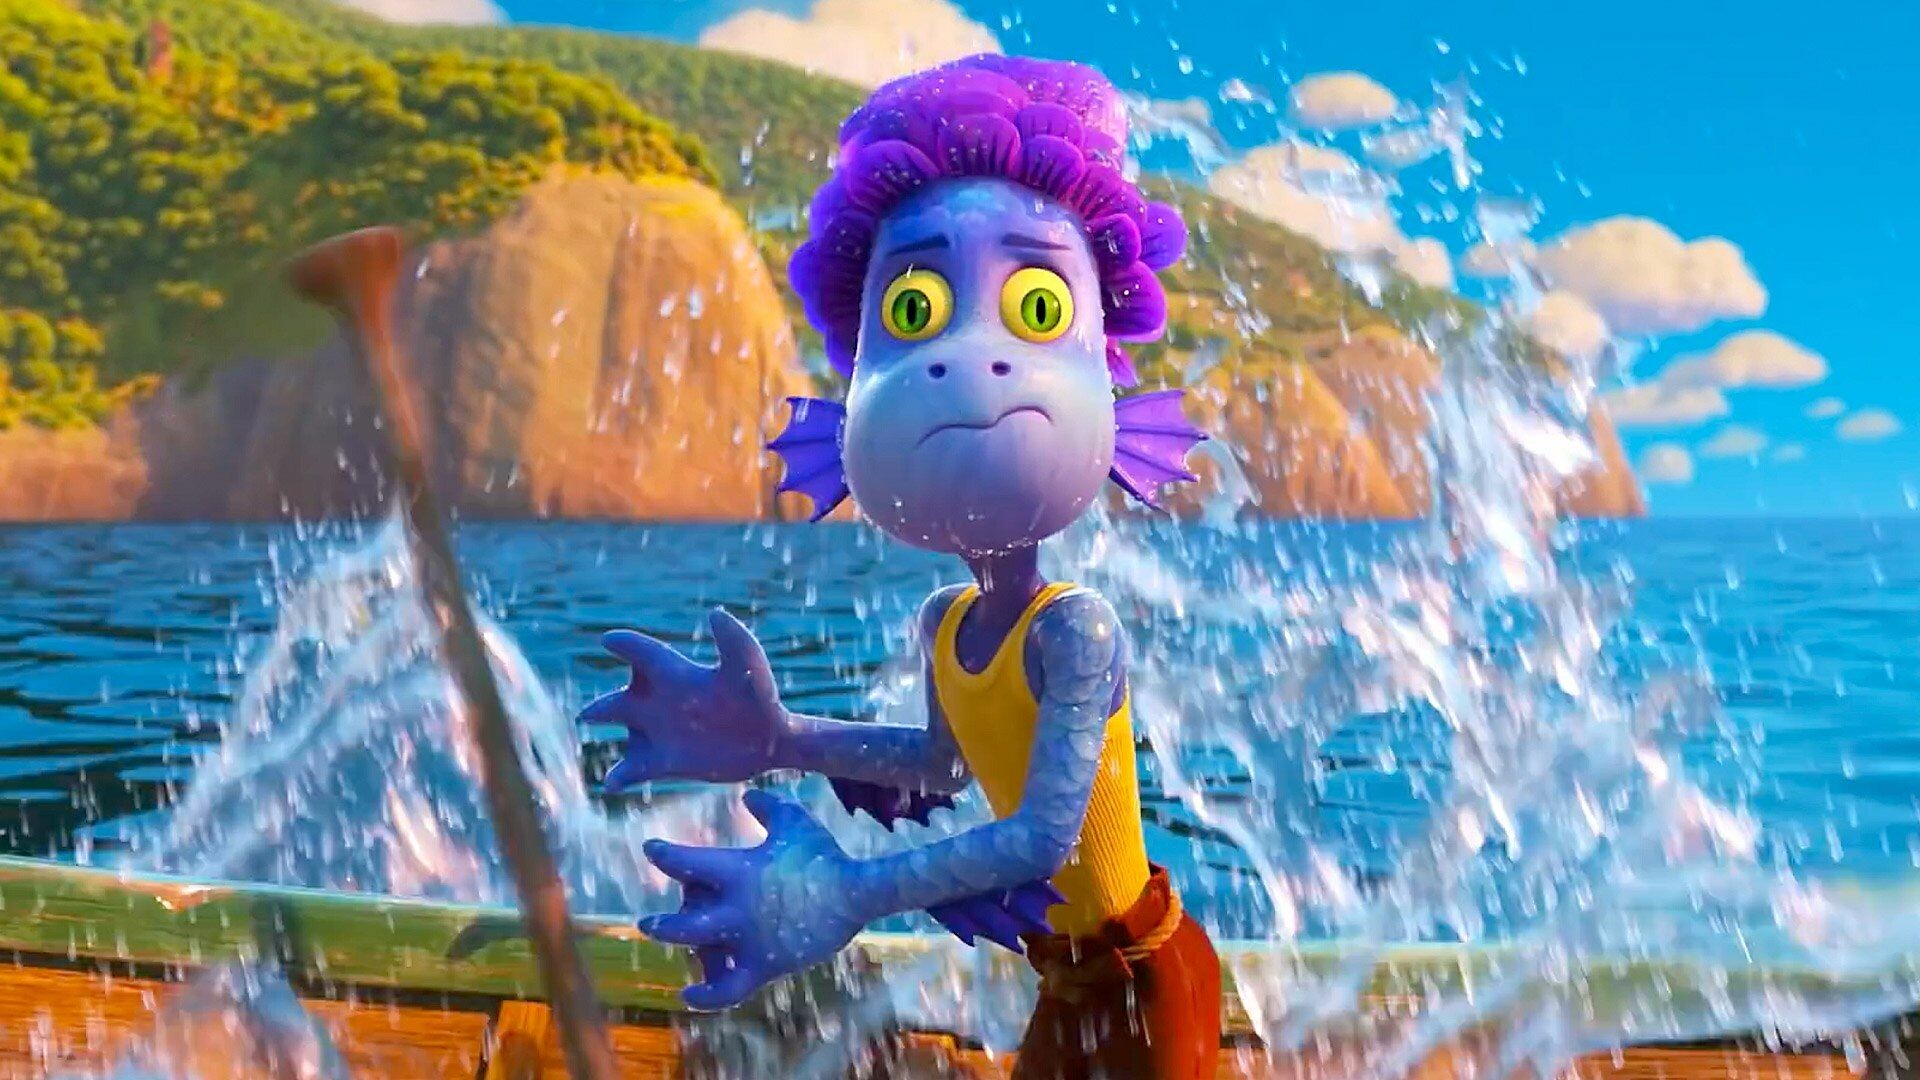 Luca: Pixar, Alberto Scorfano, a 14-year-old boy/sea monster who is enthusiastic to explore the human world. 1920x1080 Full HD Wallpaper.